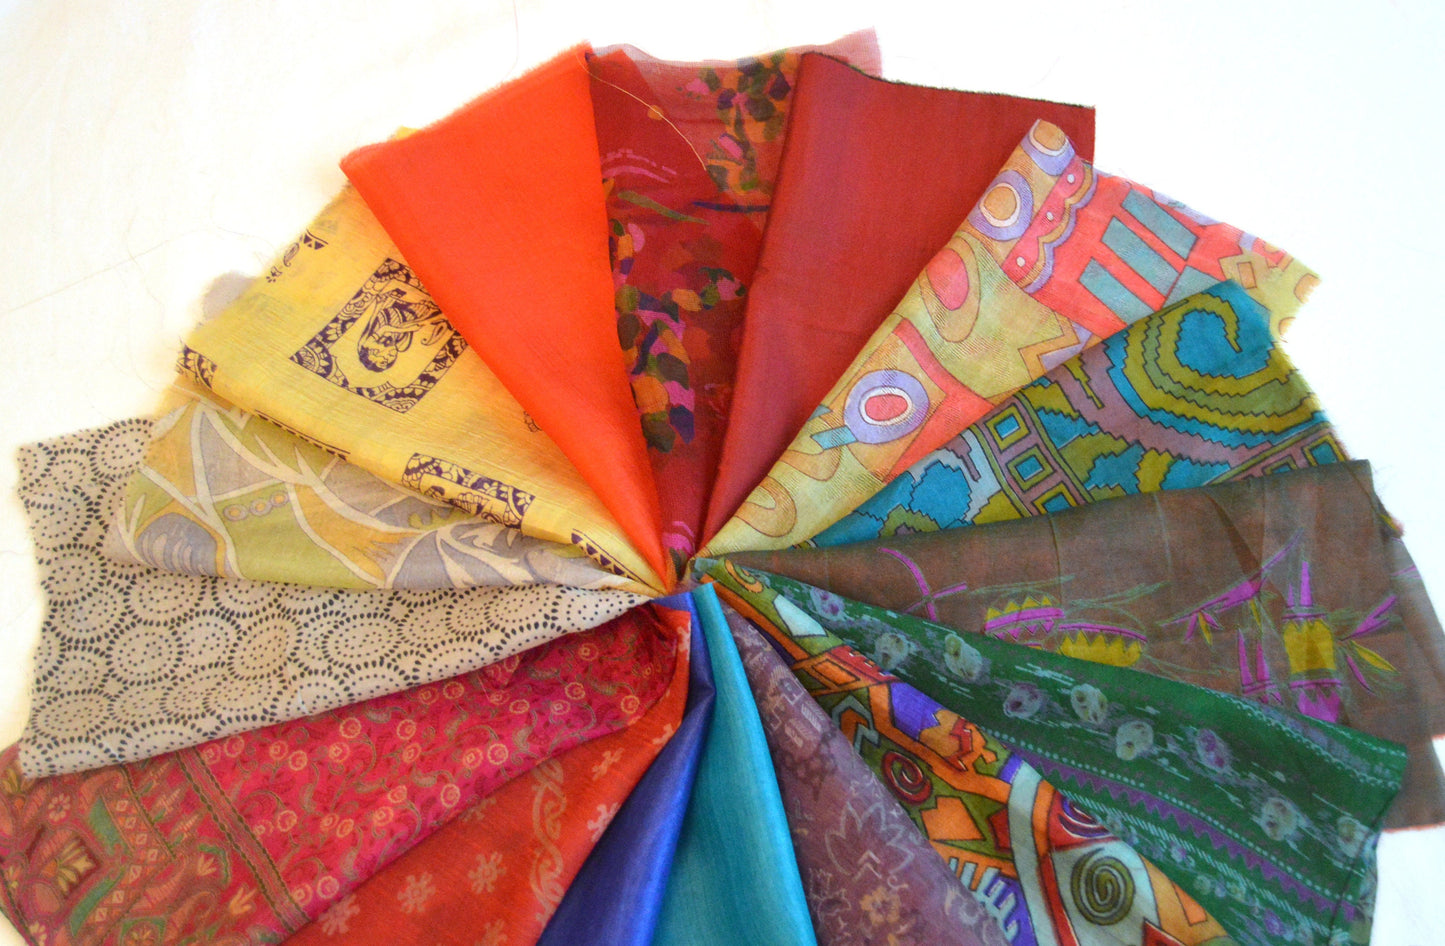 10 Inch x 16 Pieces Mixed Upcycled Vintage Sari Silk Squares